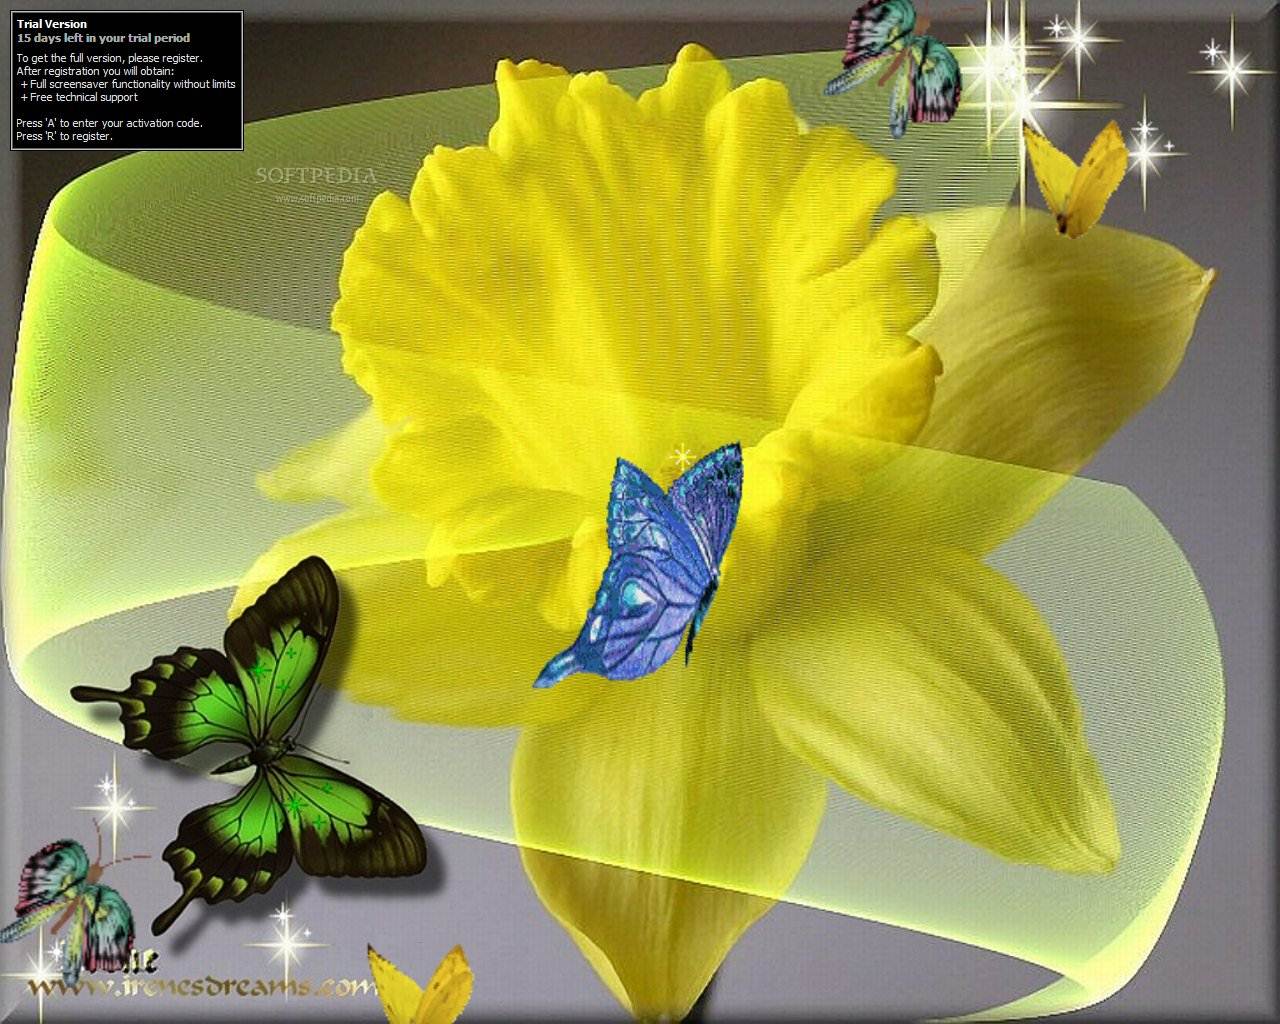 Butterfly Daffodil Screensaver   The Butterfly Daffodil Screensaver